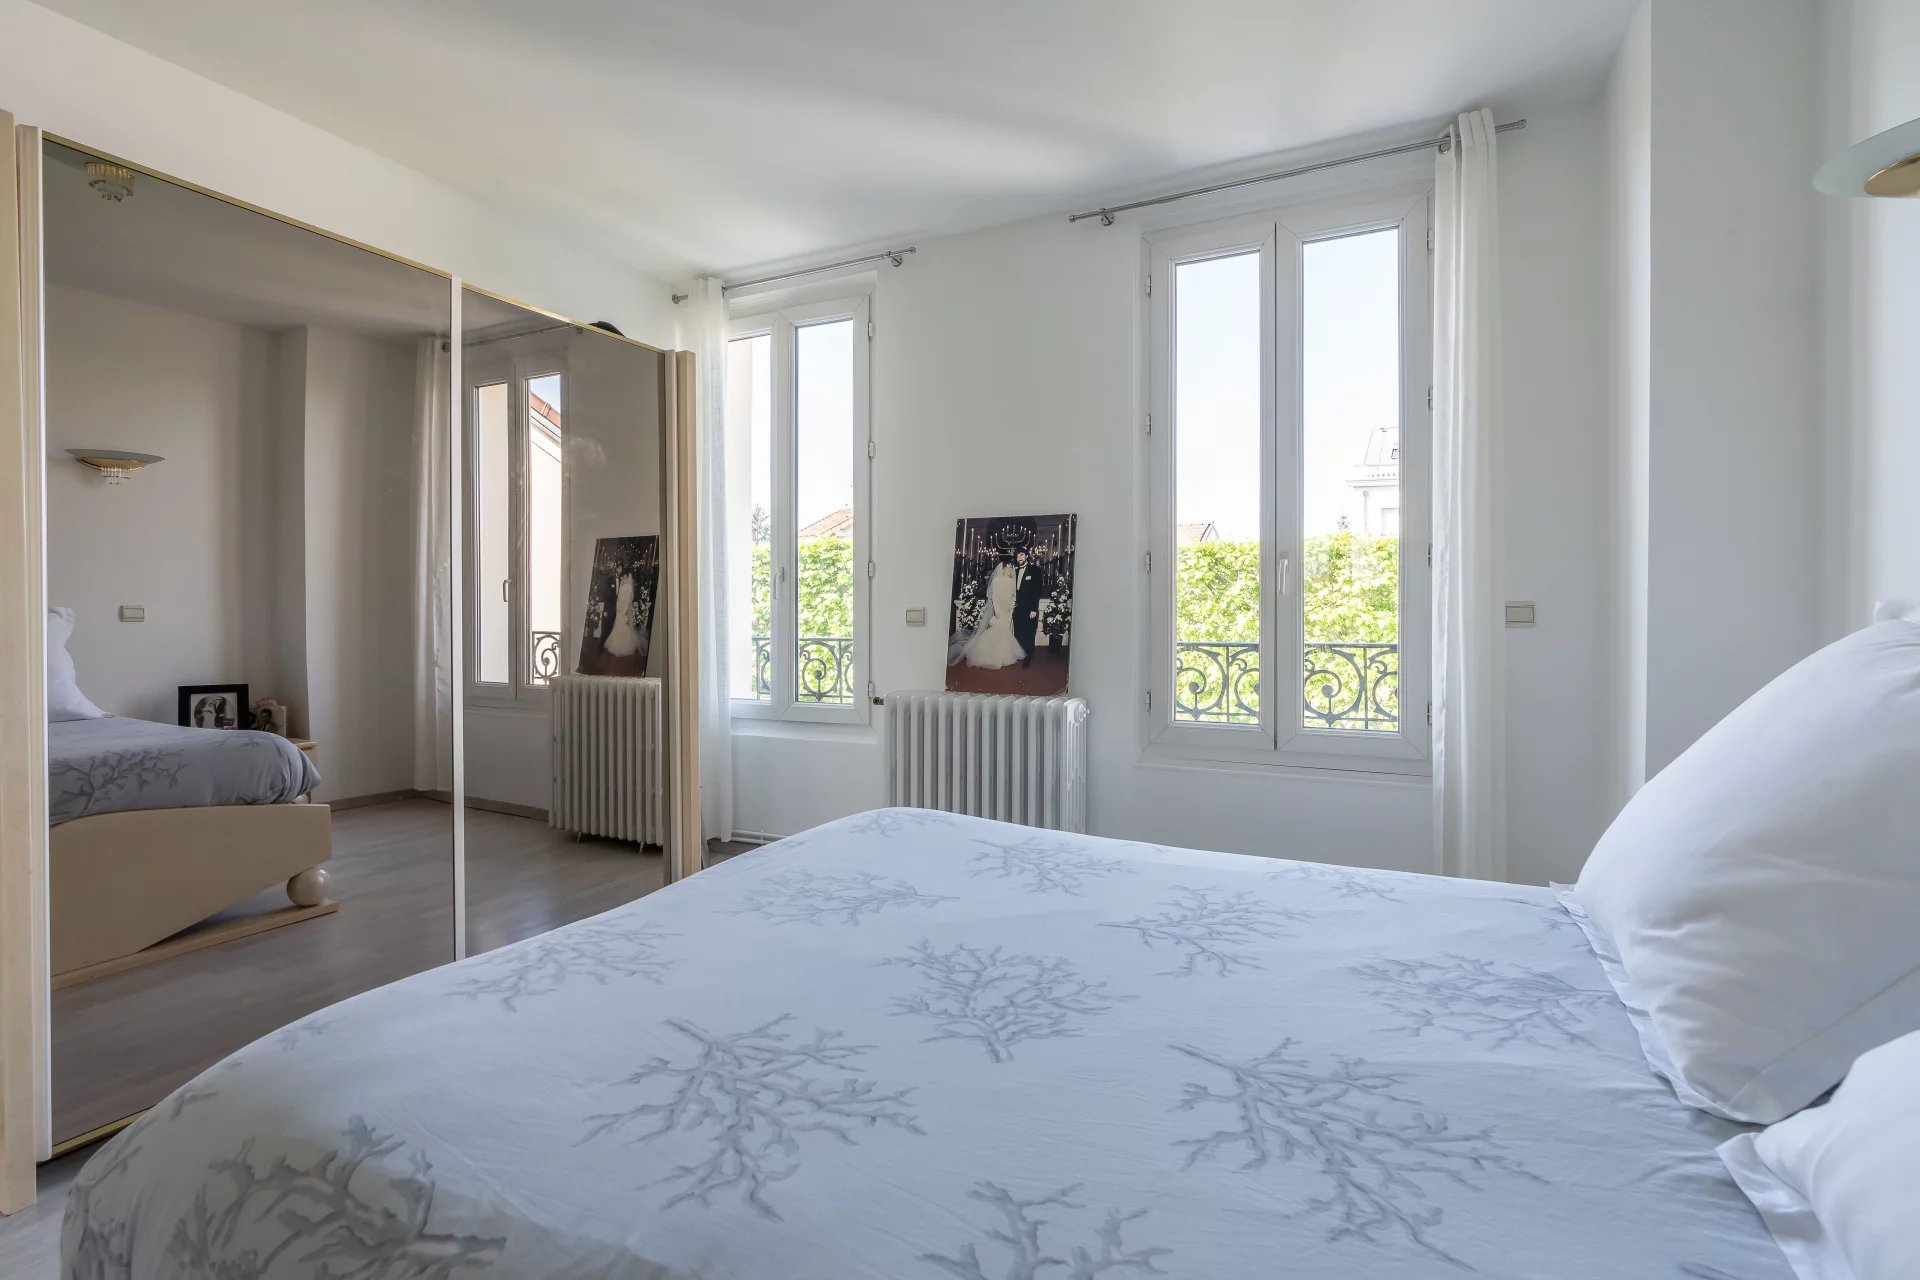 MAISON INDIVIDUELLE 4 CHAMBRES